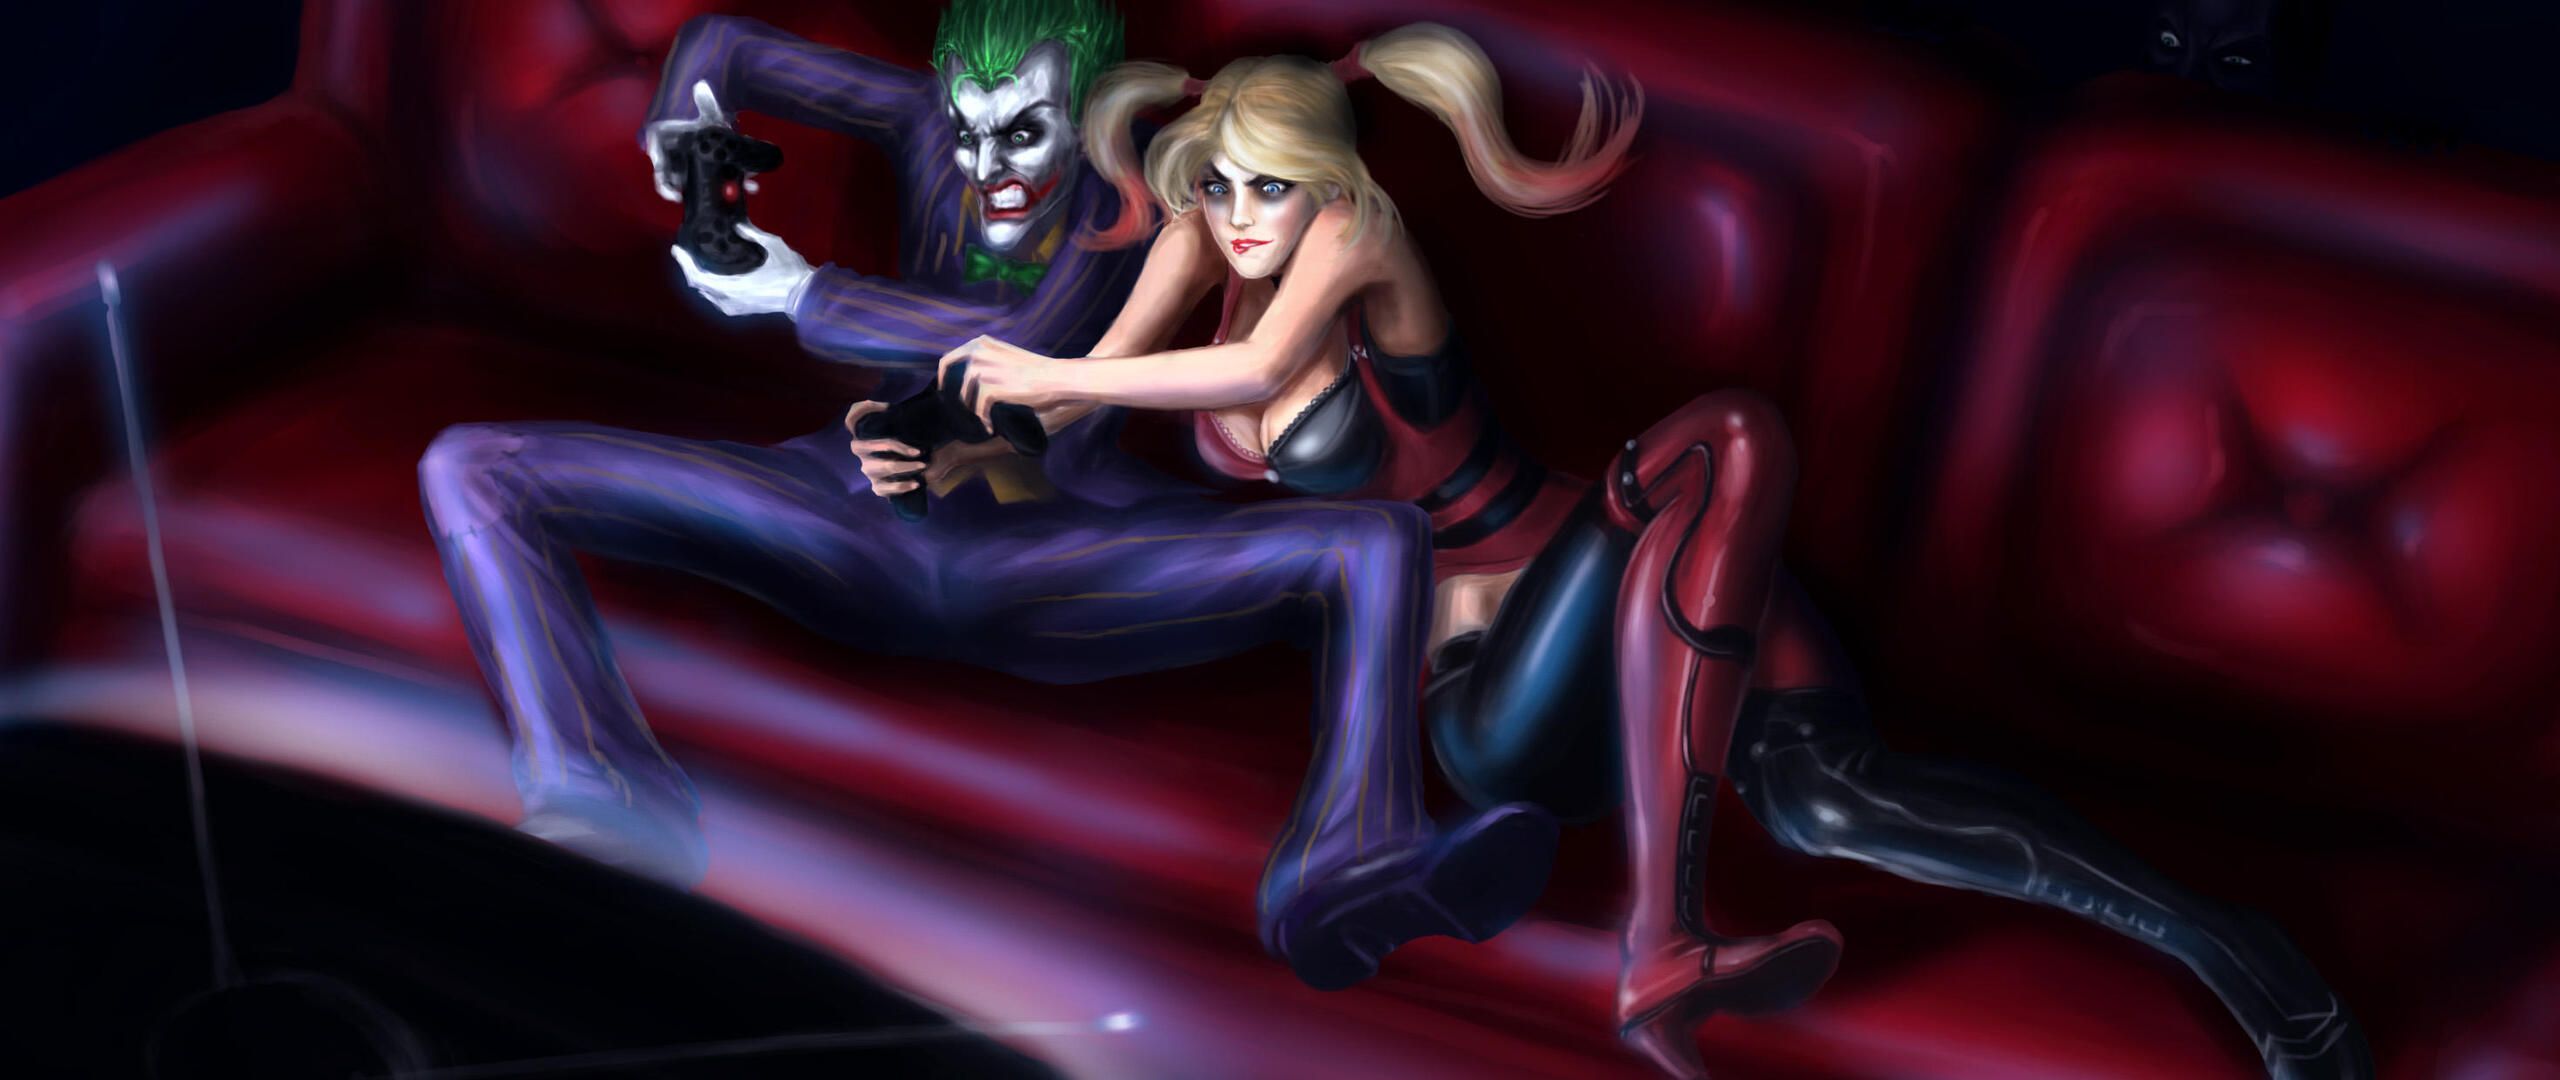 Harley And Joker Playing Games 2560x1080 Resolution HD